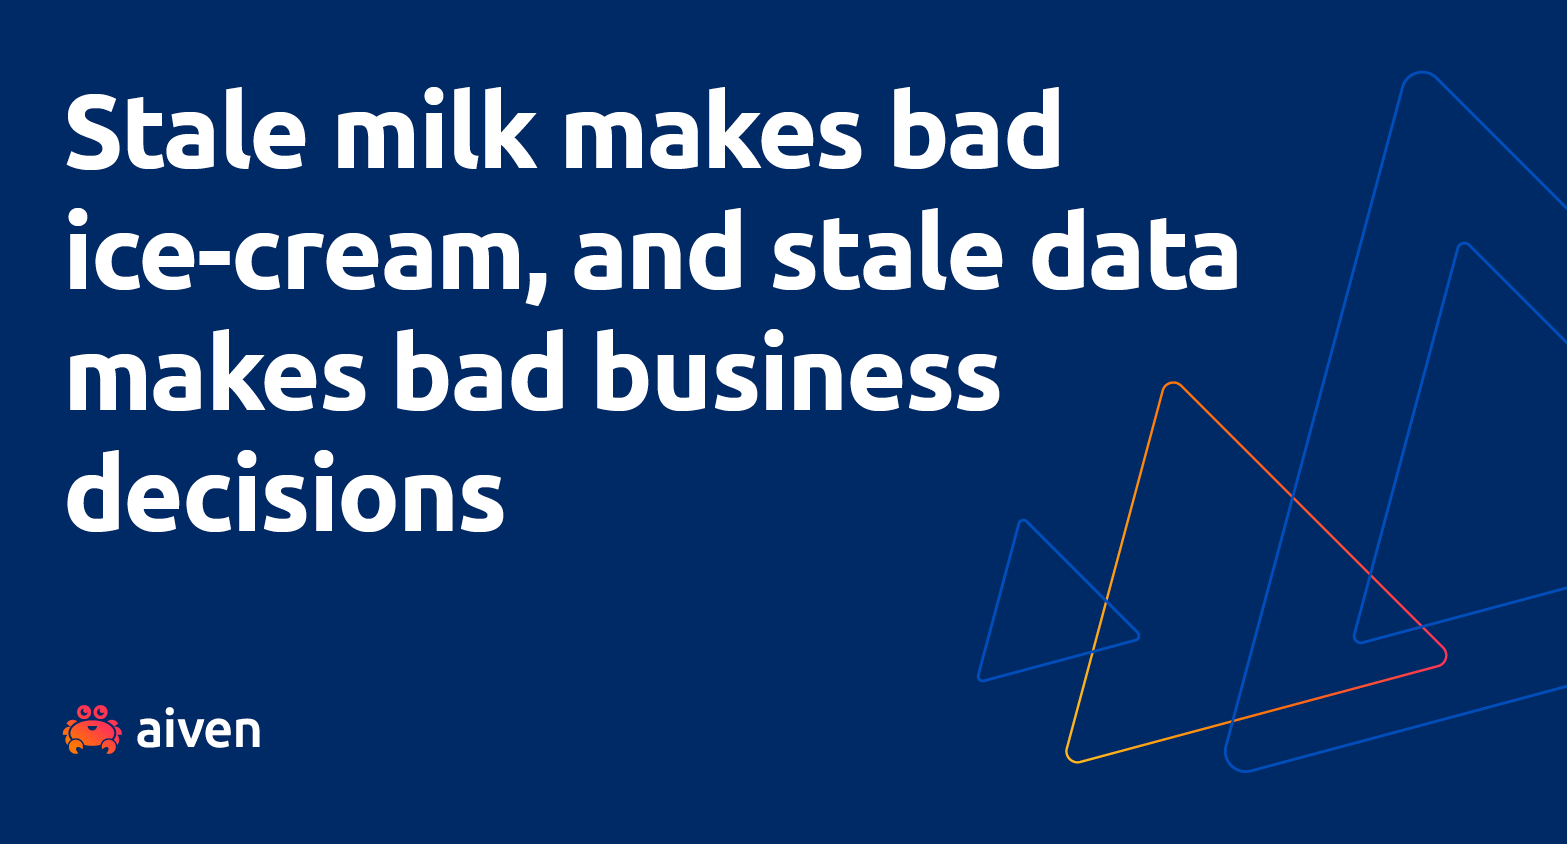 A blue background, with some triangles, and the text "Stale milk makes bad ice-cream, and stale data makes bad business decisions"